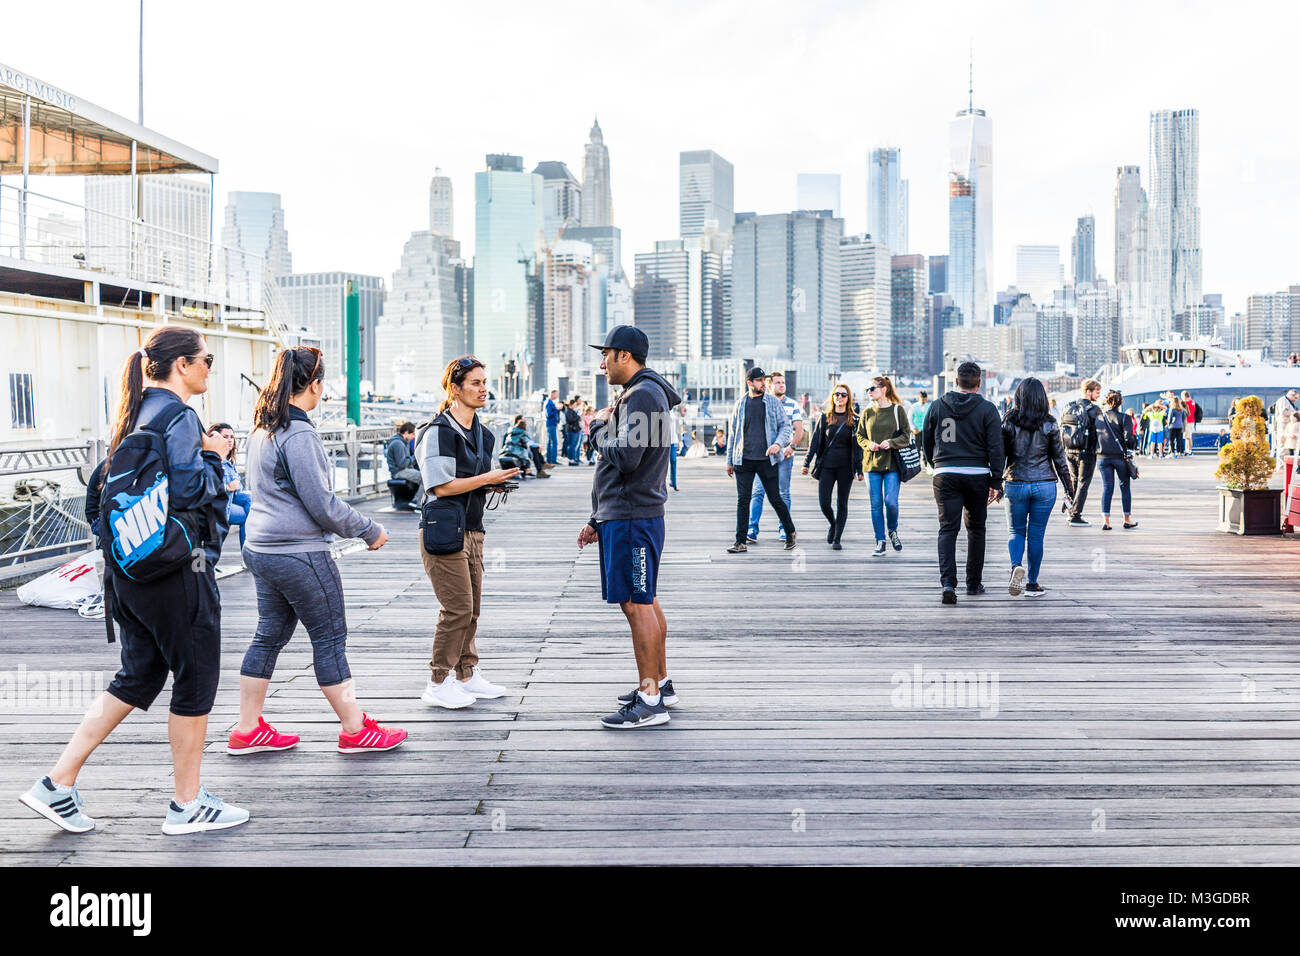 Brooklyn, USA - October 28, 2017: Outside outdoors in NYC New York City Brooklyn Bridge Park with many crowd of people on wooden boardwalk pier dock o Stock Photo